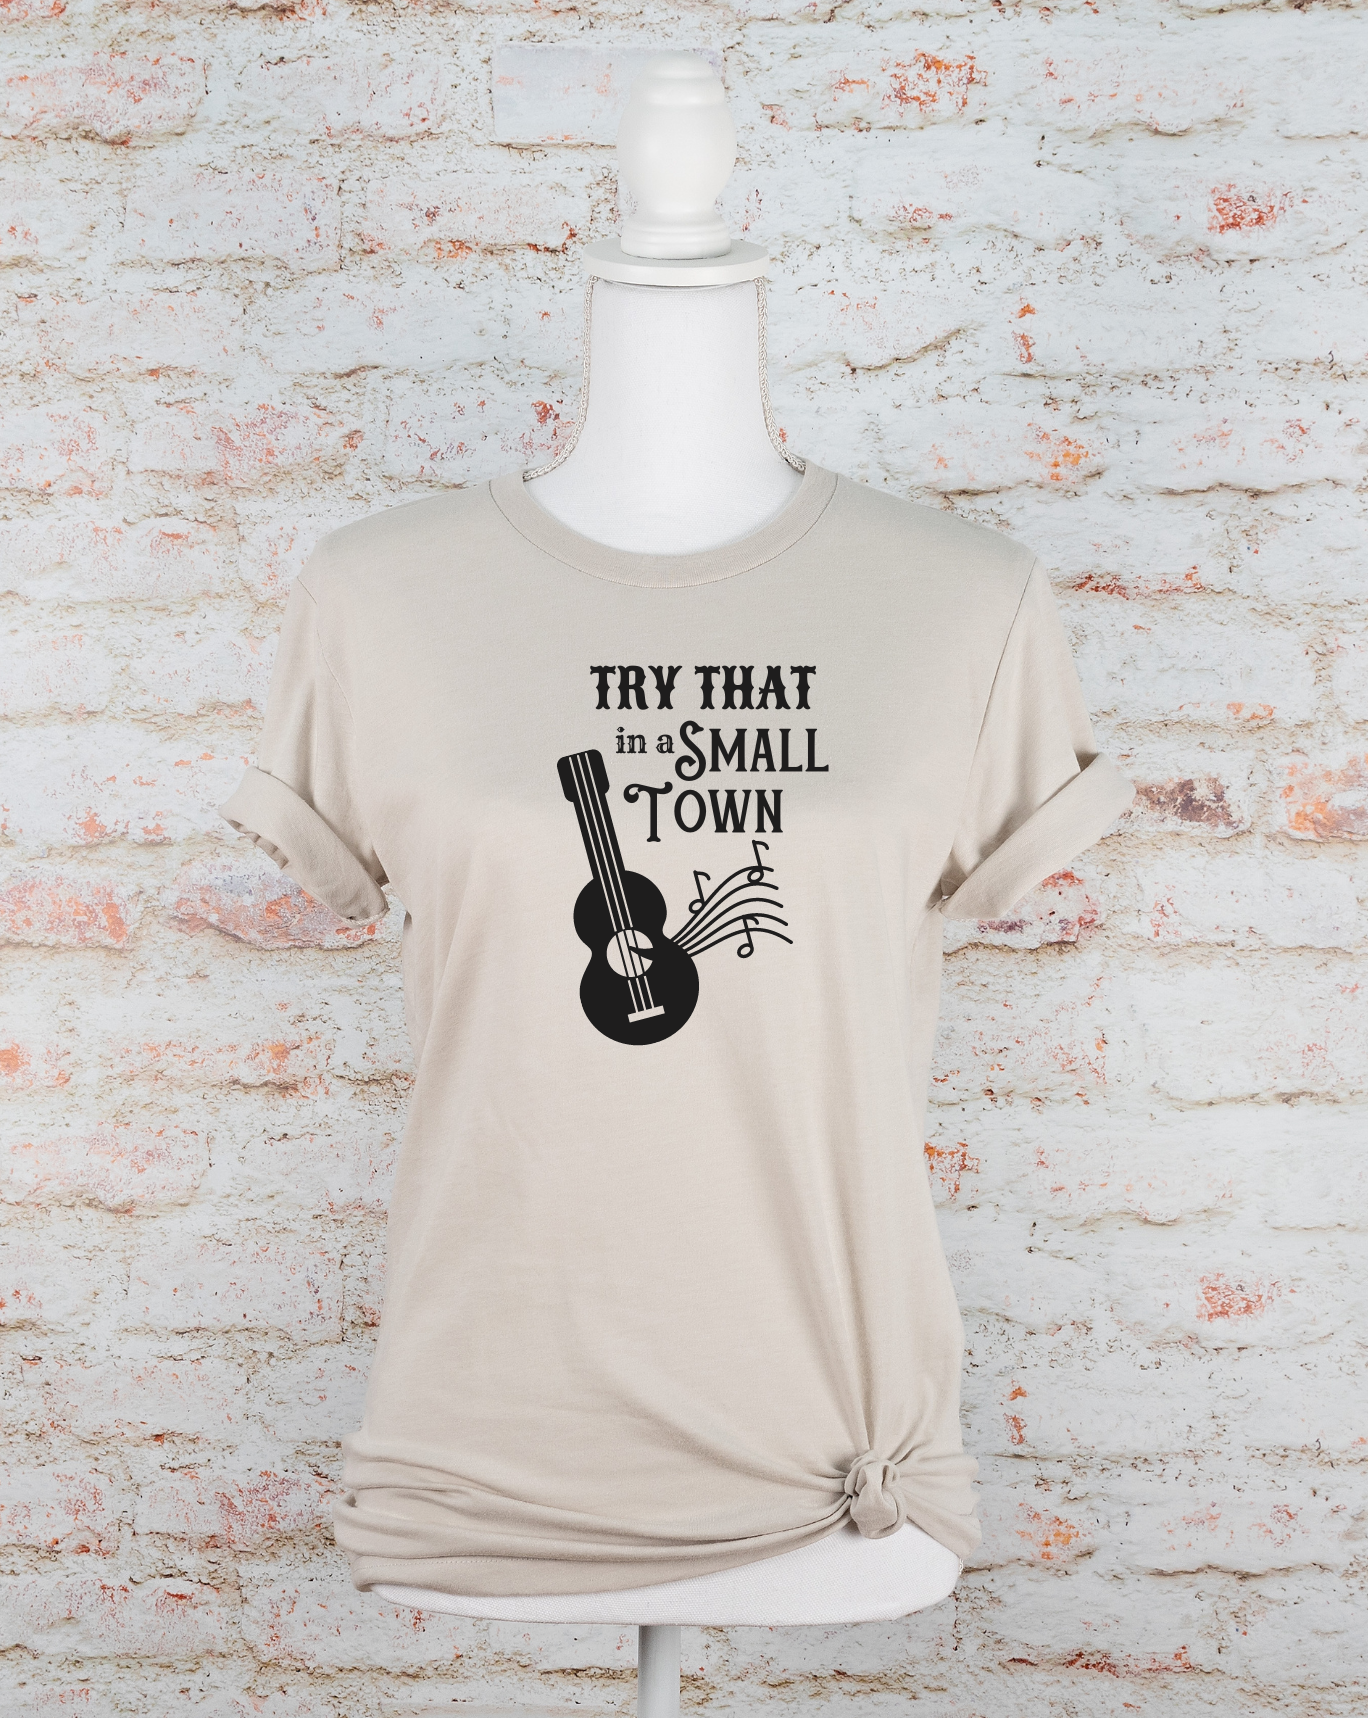 Try That in a Small Town Tee